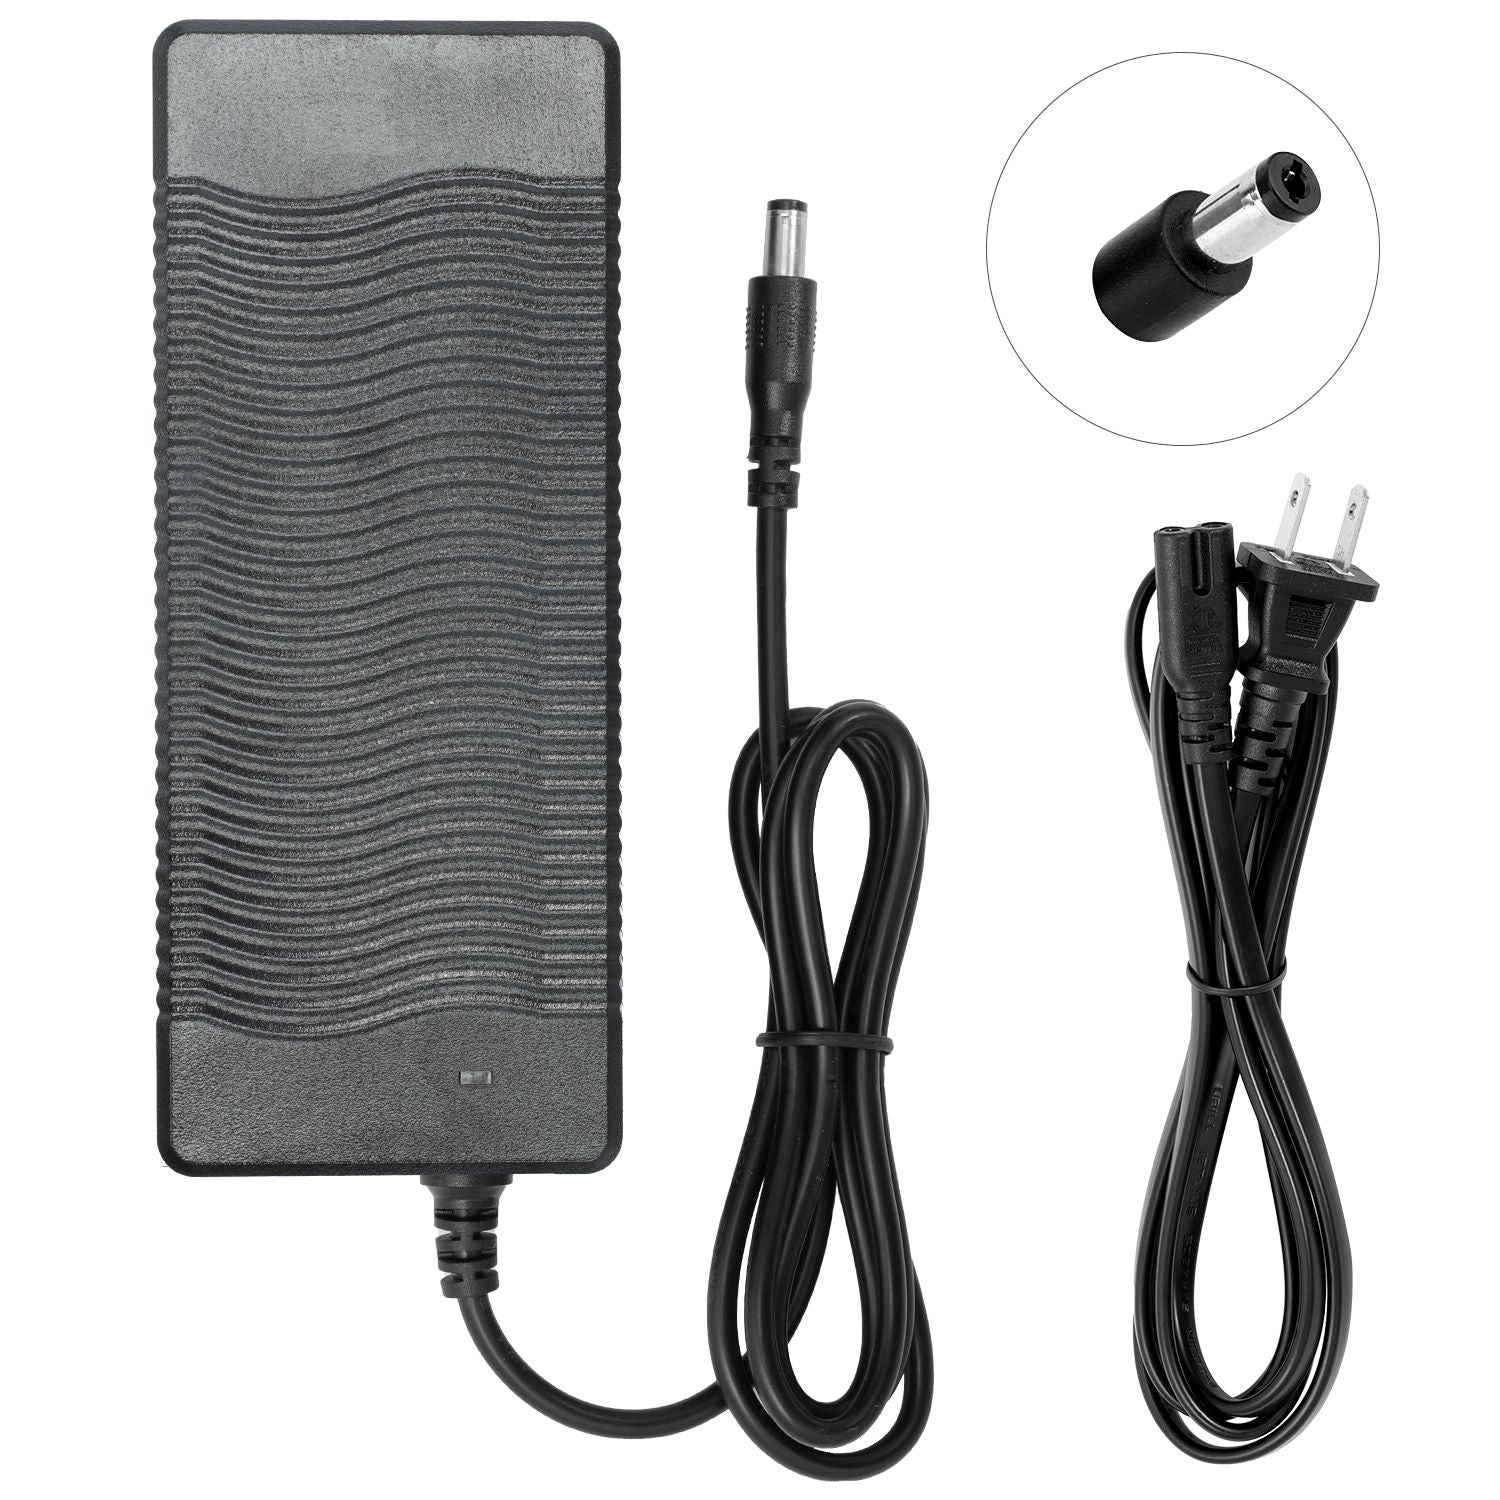 Charger for Rad Power RadRover 6 Plus eBike